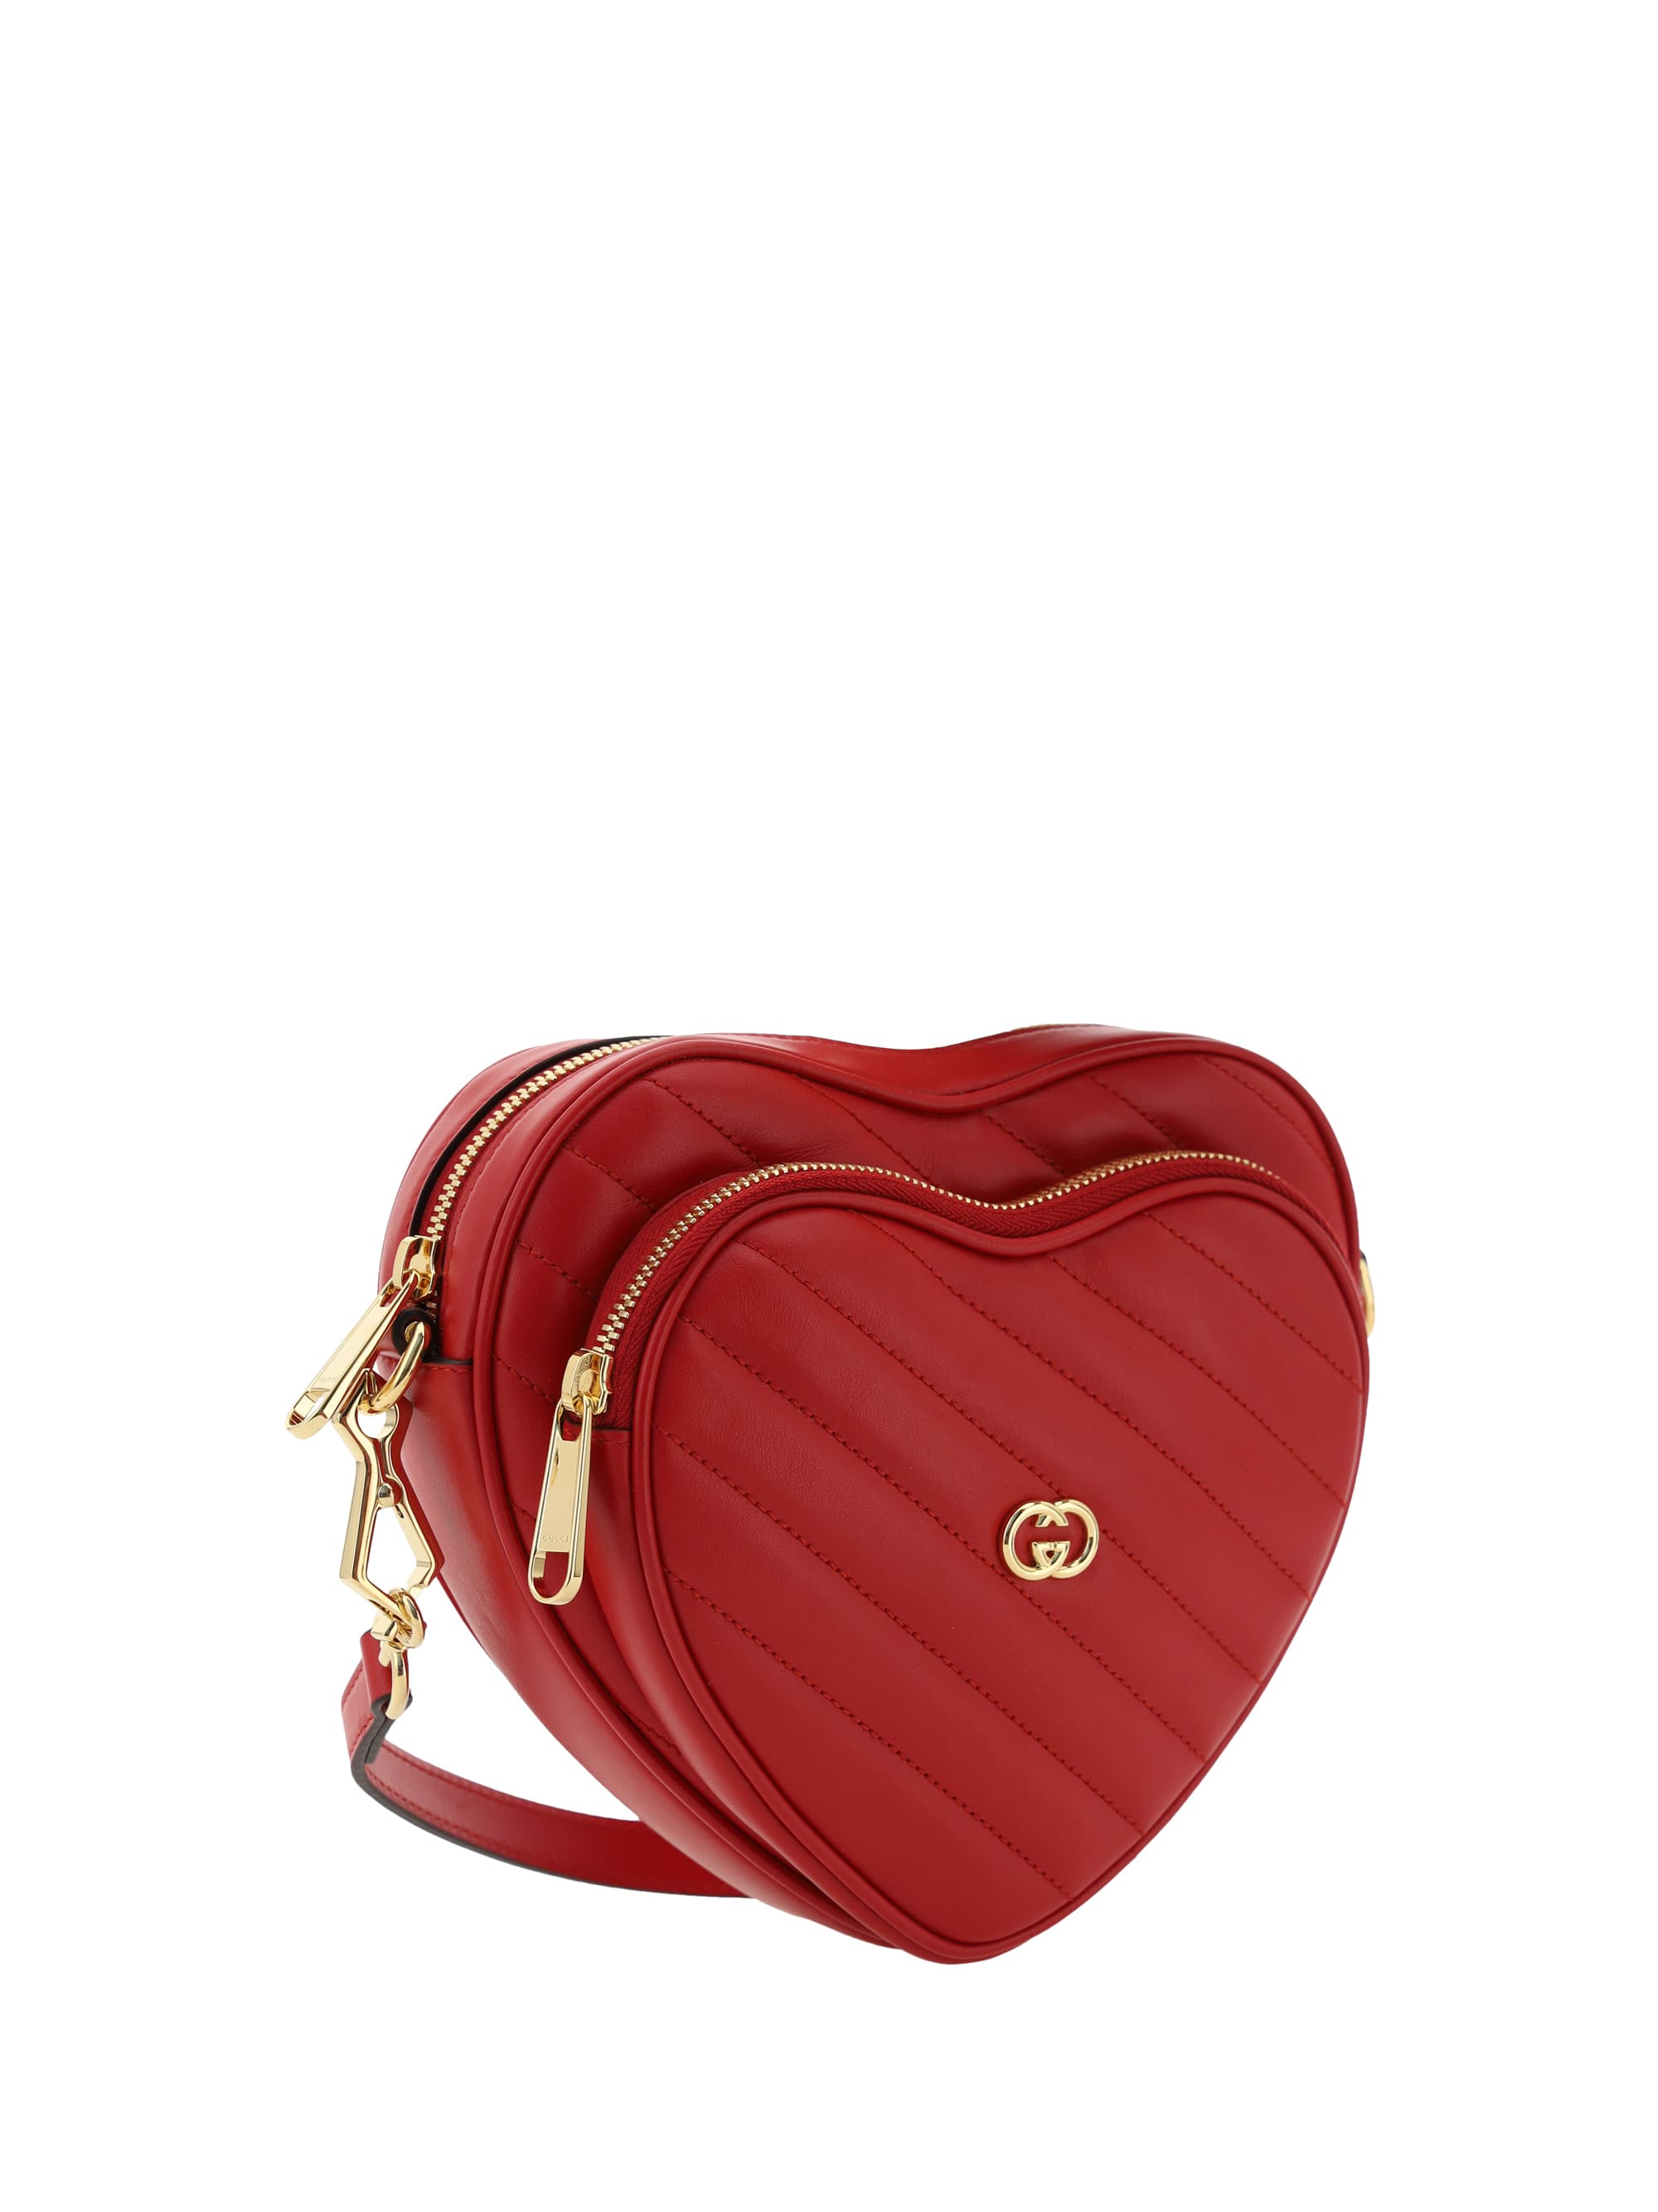 Gucci Heart - Crossbody bag for Woman - Red - 751628AACCL-6433